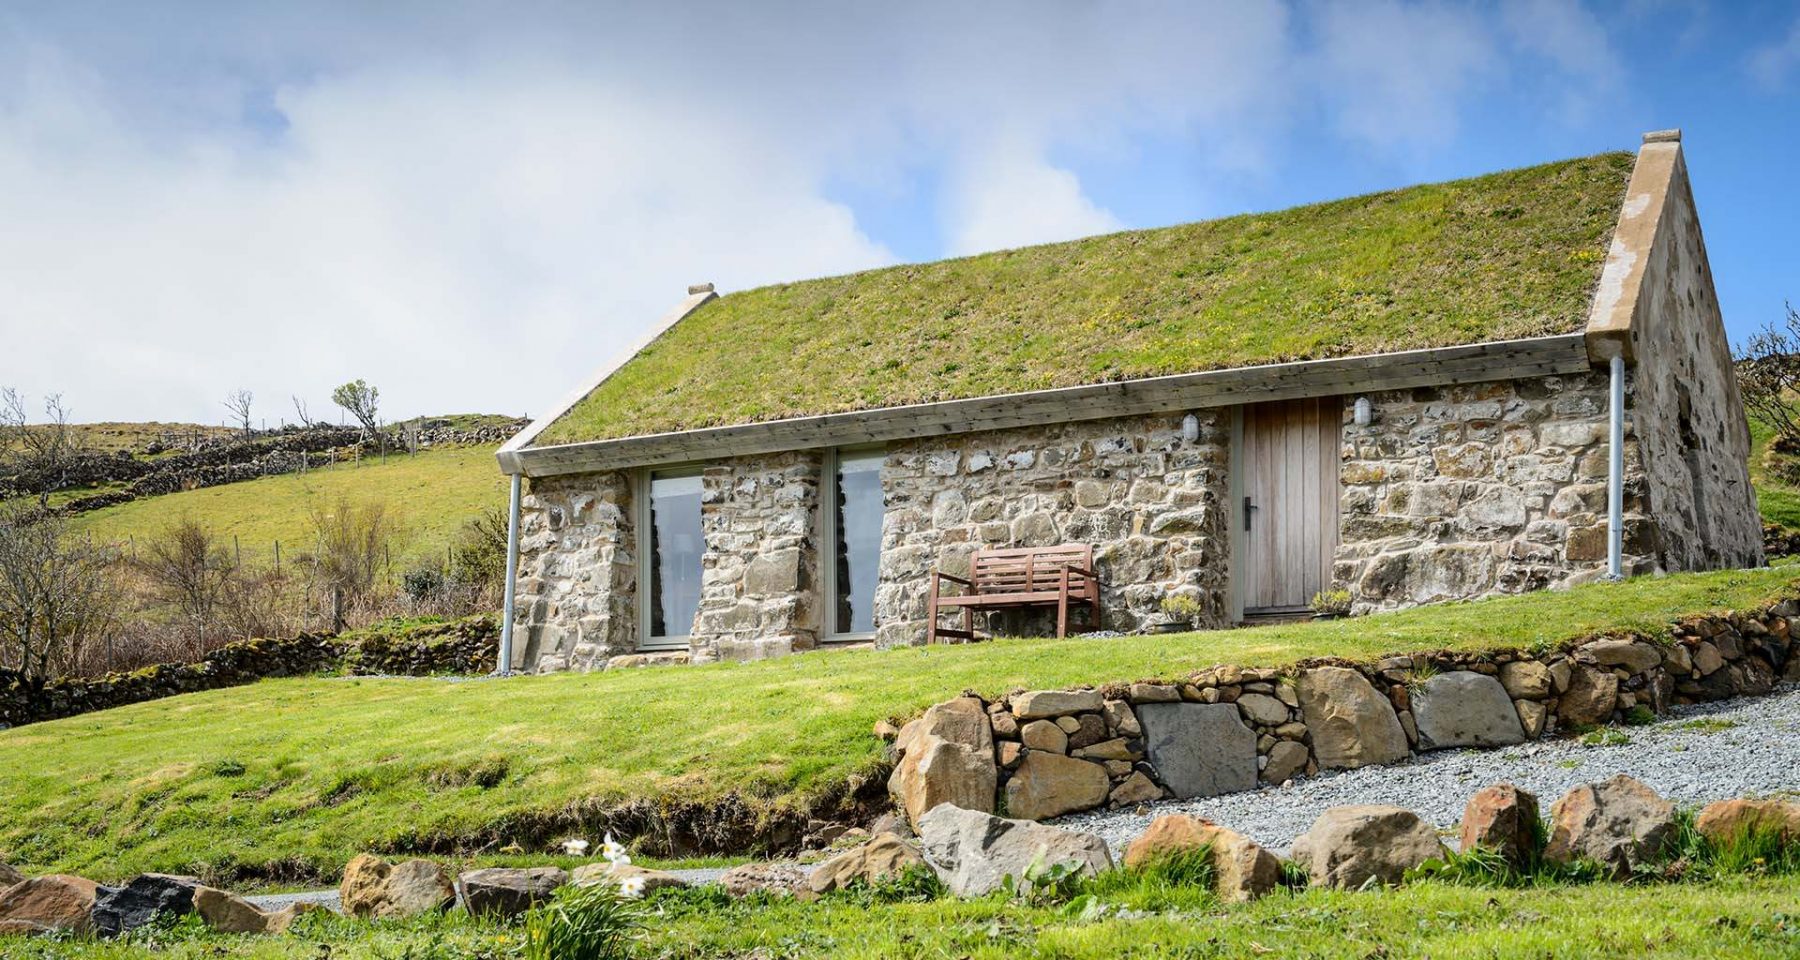 Blackhouse Cottage. A renovated Hebridean Blackhouse with a traditional turf roof.